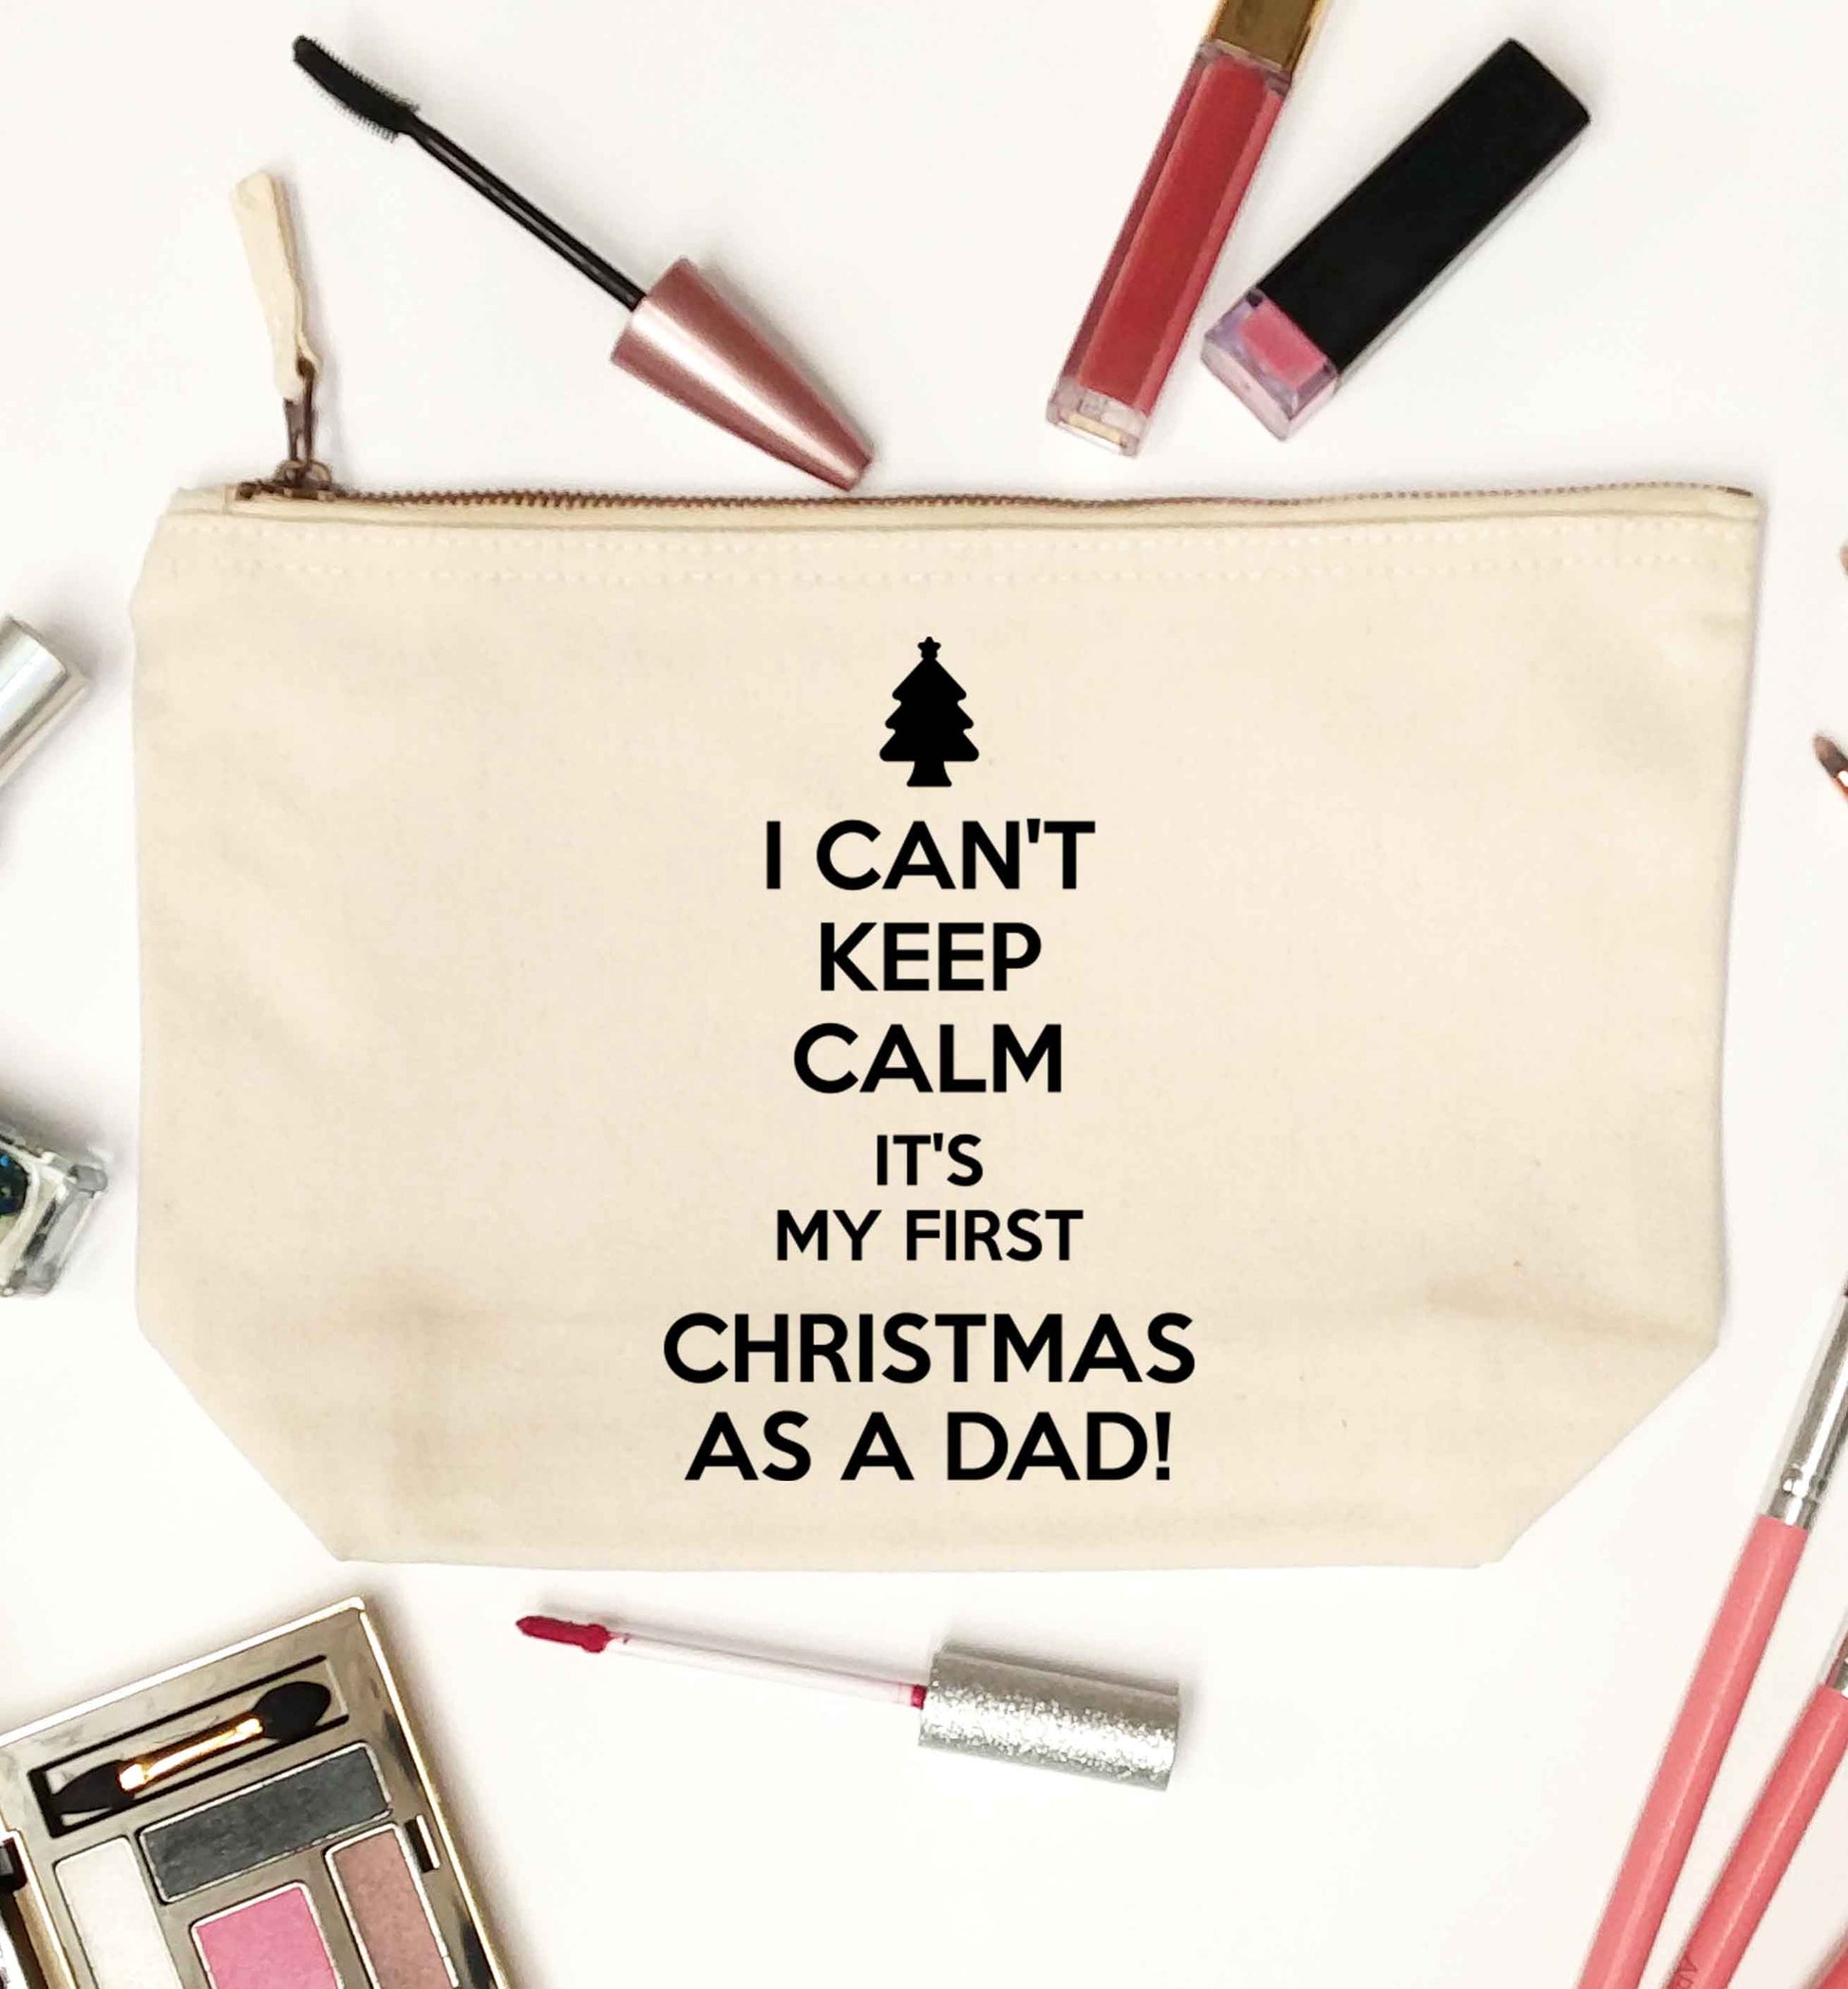 I can't keep calm it's my first Christmas as a dad natural makeup bag